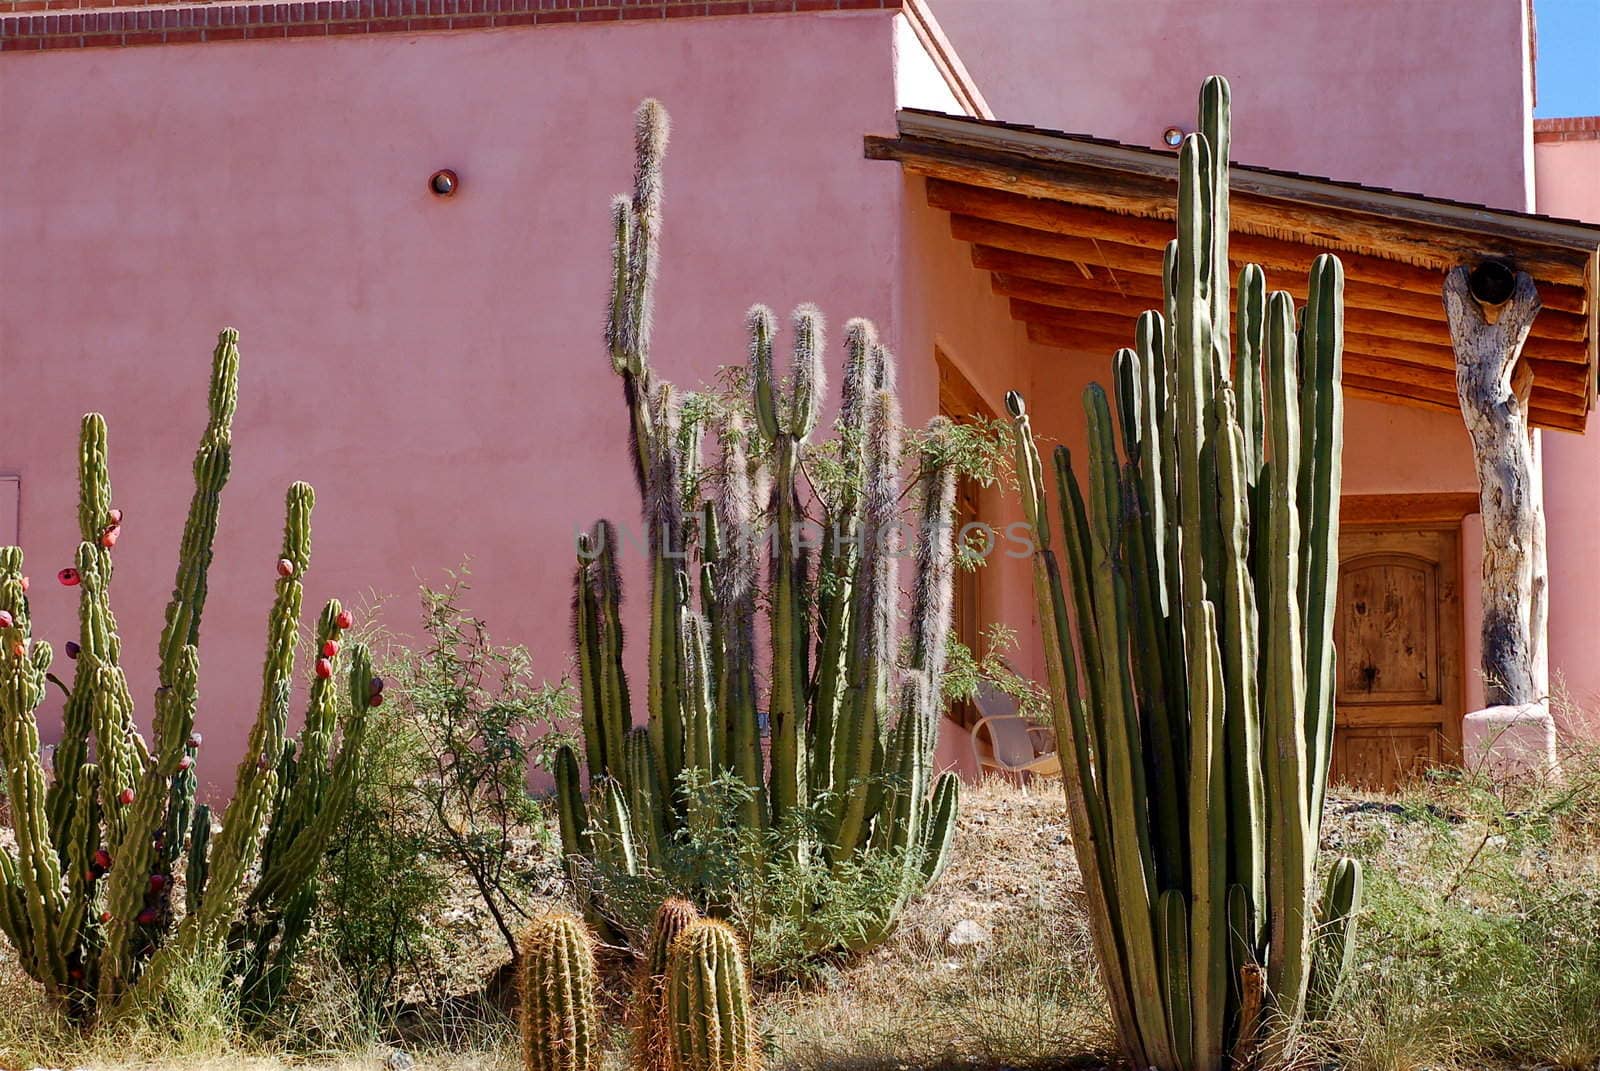 Selection of cactus outside a pink desert ranch house